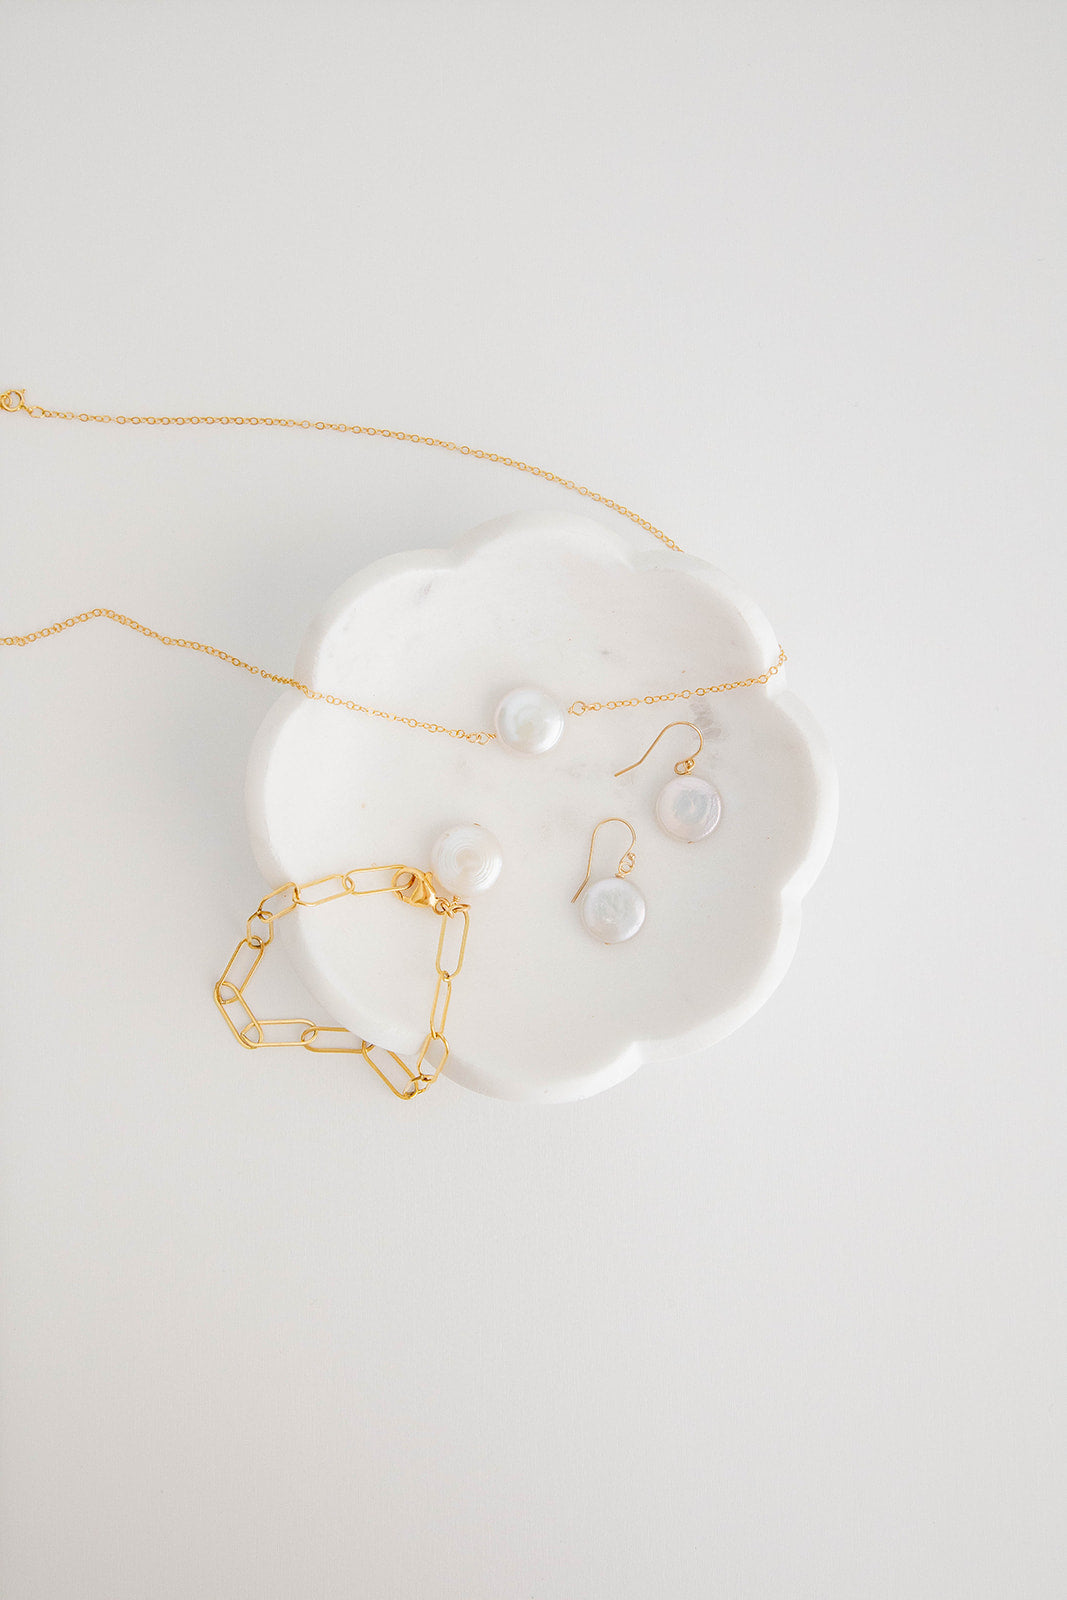 A pair of earrings with freshwater pearl coins hung on gold filled shepherd’s hooks lay on a white marble dish on a white flatlay background with matching necklace and bracelets.